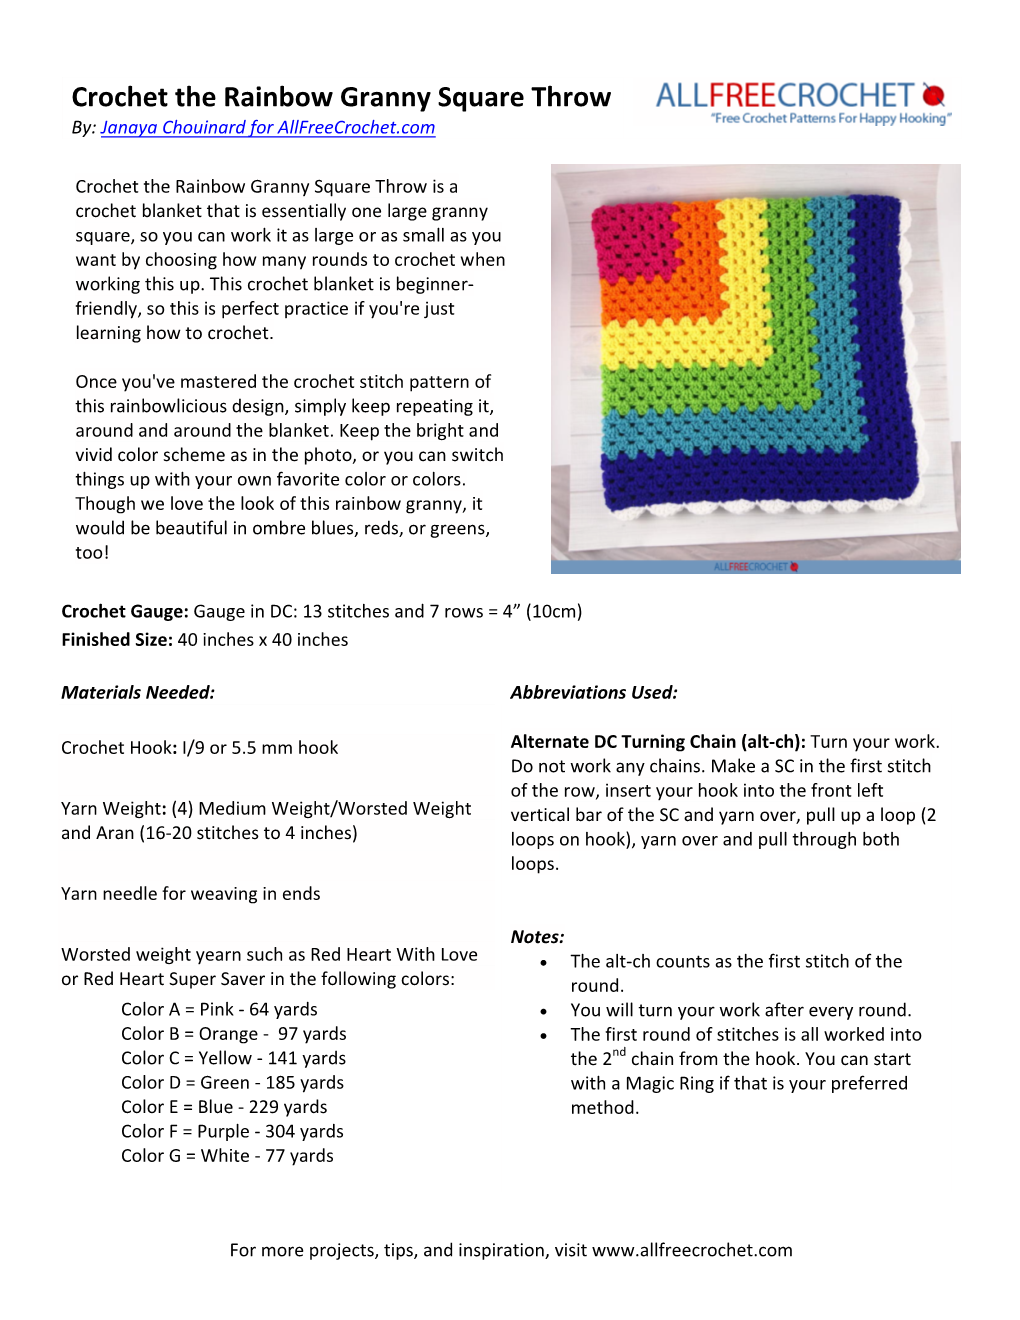 To Download the Crochet the Rainbow Granny Square Throw